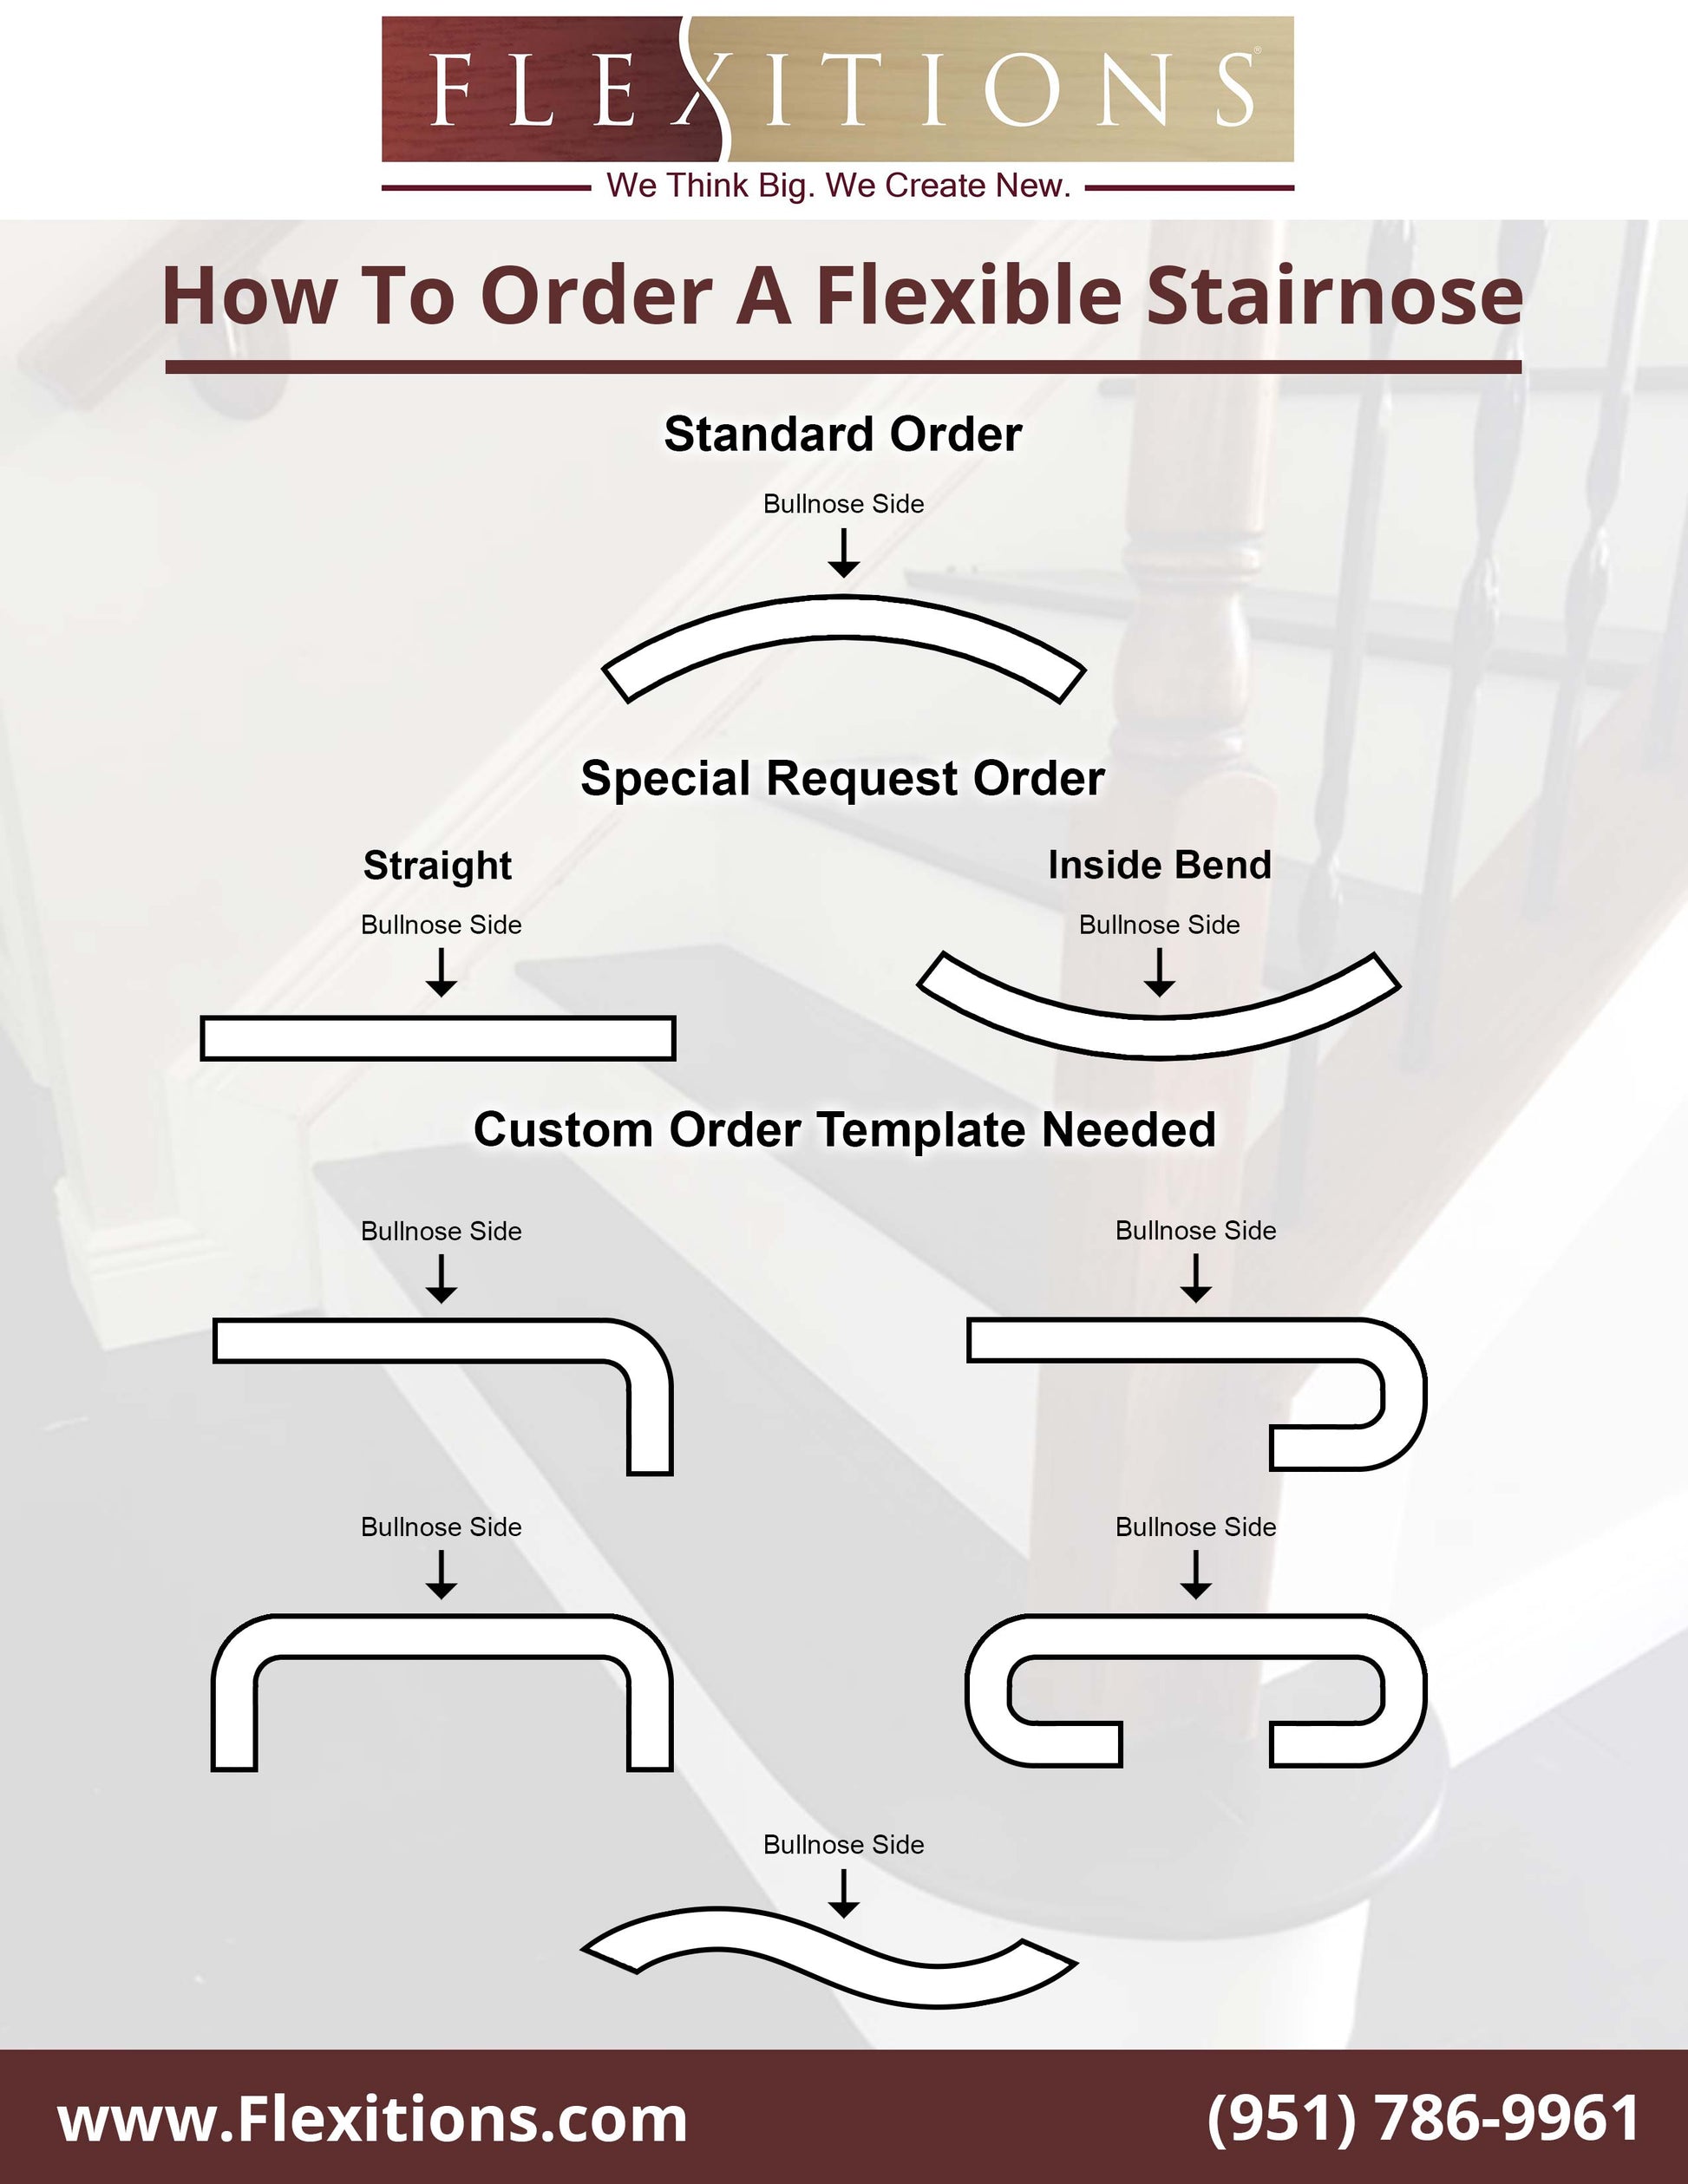 How to Order a Flexible Stairnose